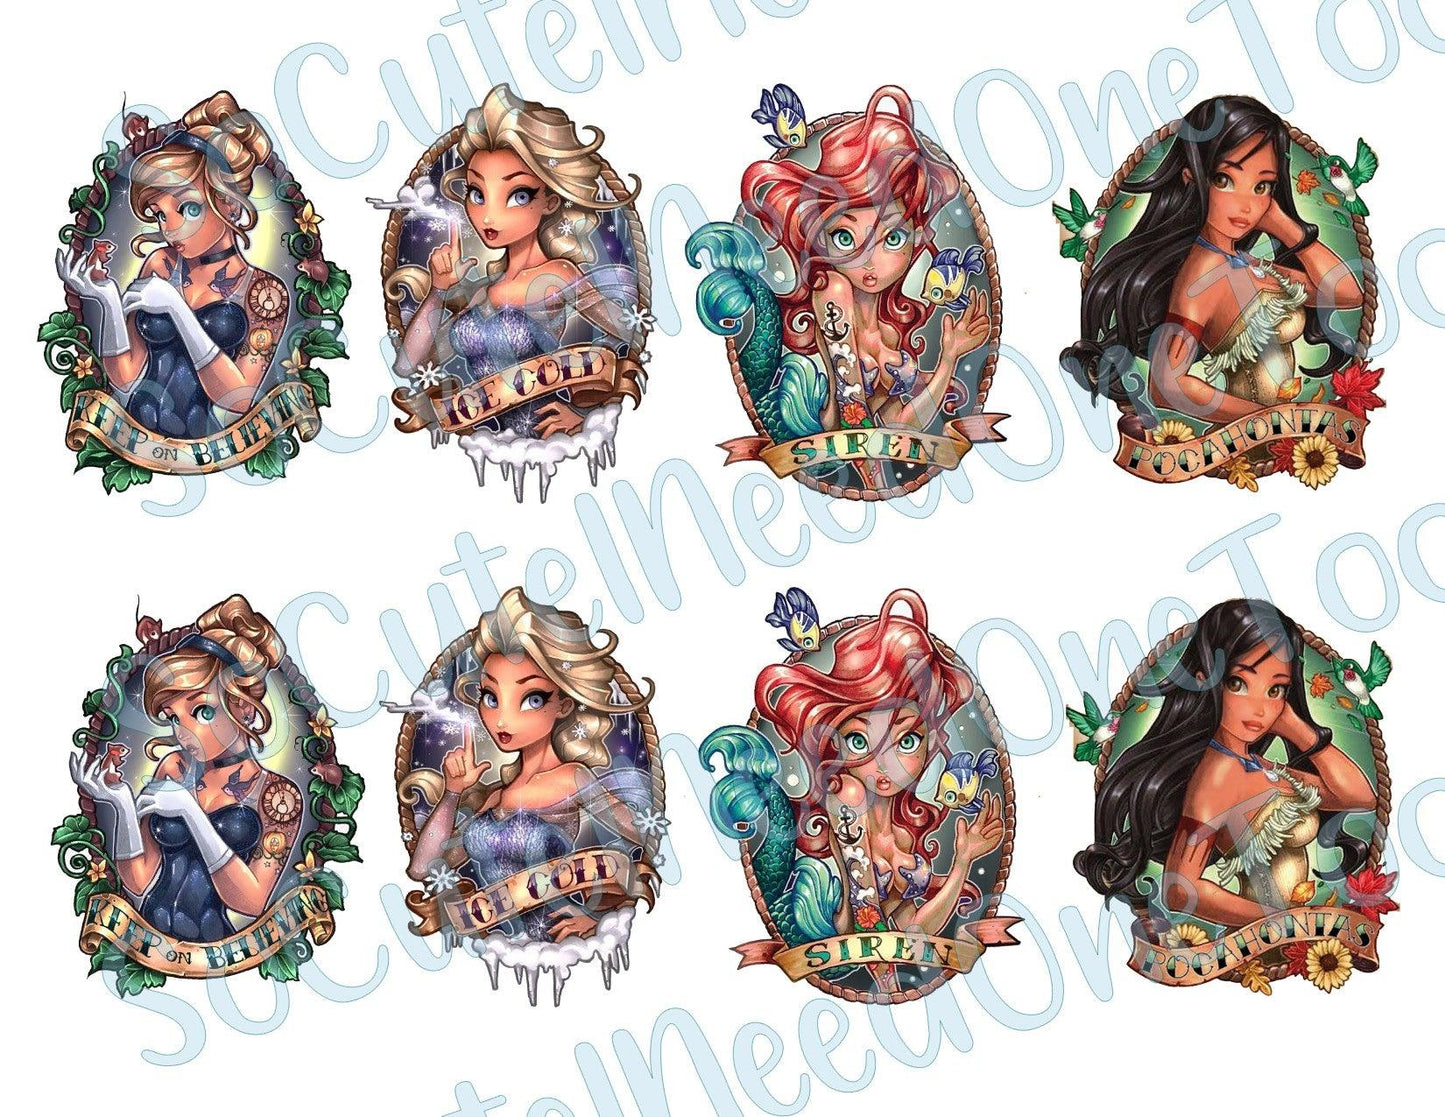 Disney Tattoos (8 Images) on Clear/White Waterslide Paper Ready To Use - SoCuteINeedOneToo